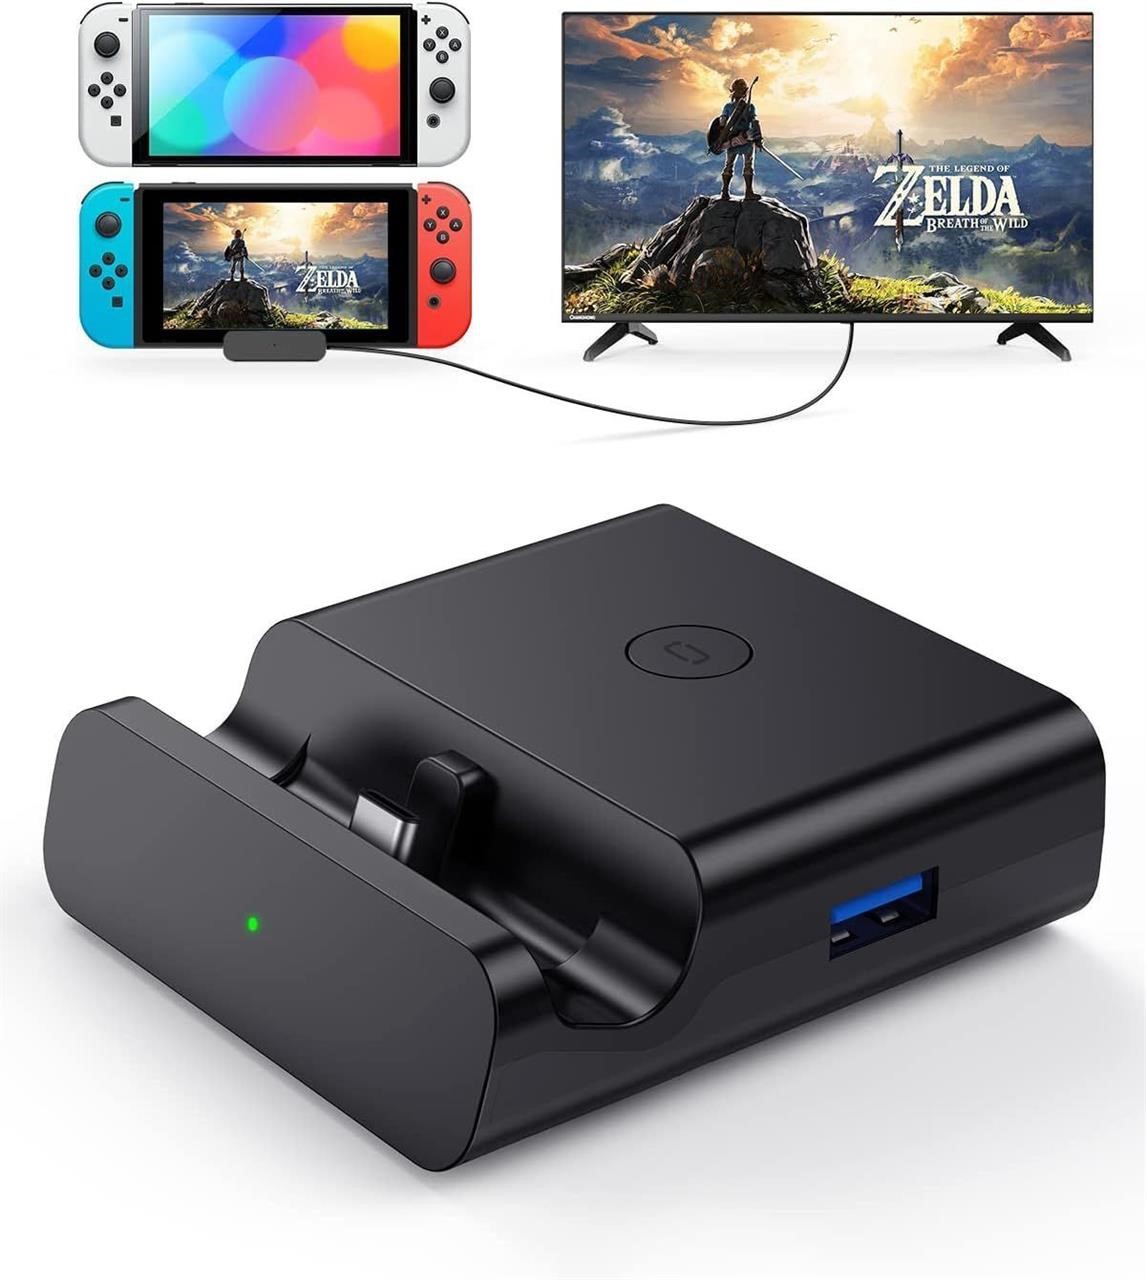 NEW $30 Switch Docking Station for TV